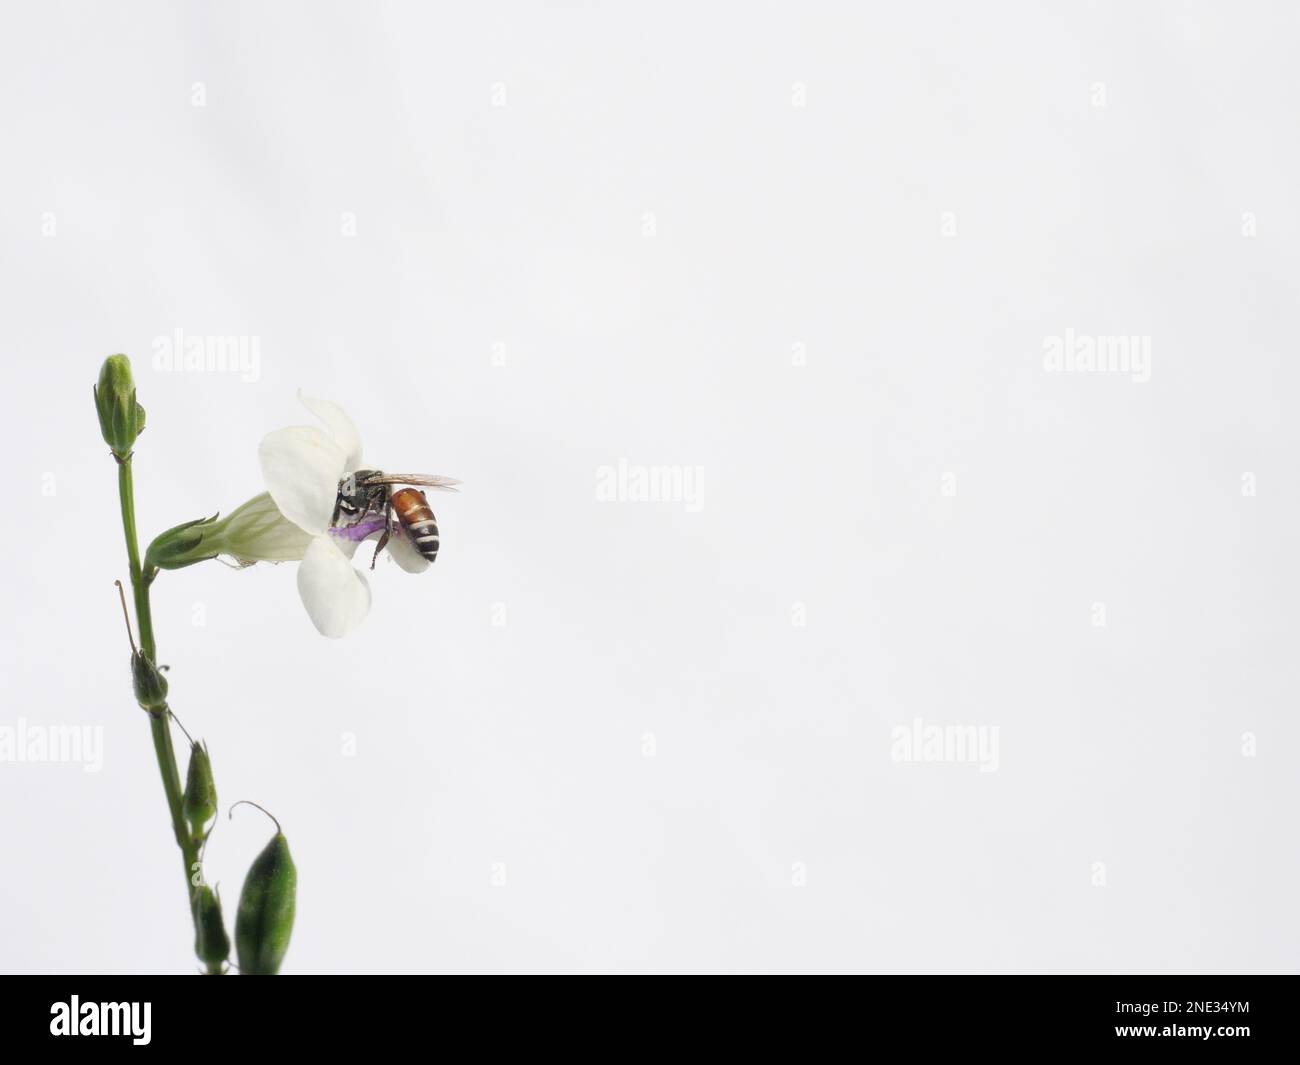 Honey bee seeking nectar on white Chinese violet or coromandel or creeping foxglove ( Asystasia gangetica ) blossom in field isolated on white Stock Photo